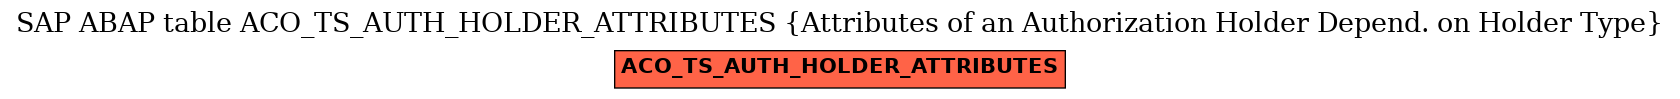 E-R Diagram for table ACO_TS_AUTH_HOLDER_ATTRIBUTES (Attributes of an Authorization Holder Depend. on Holder Type)